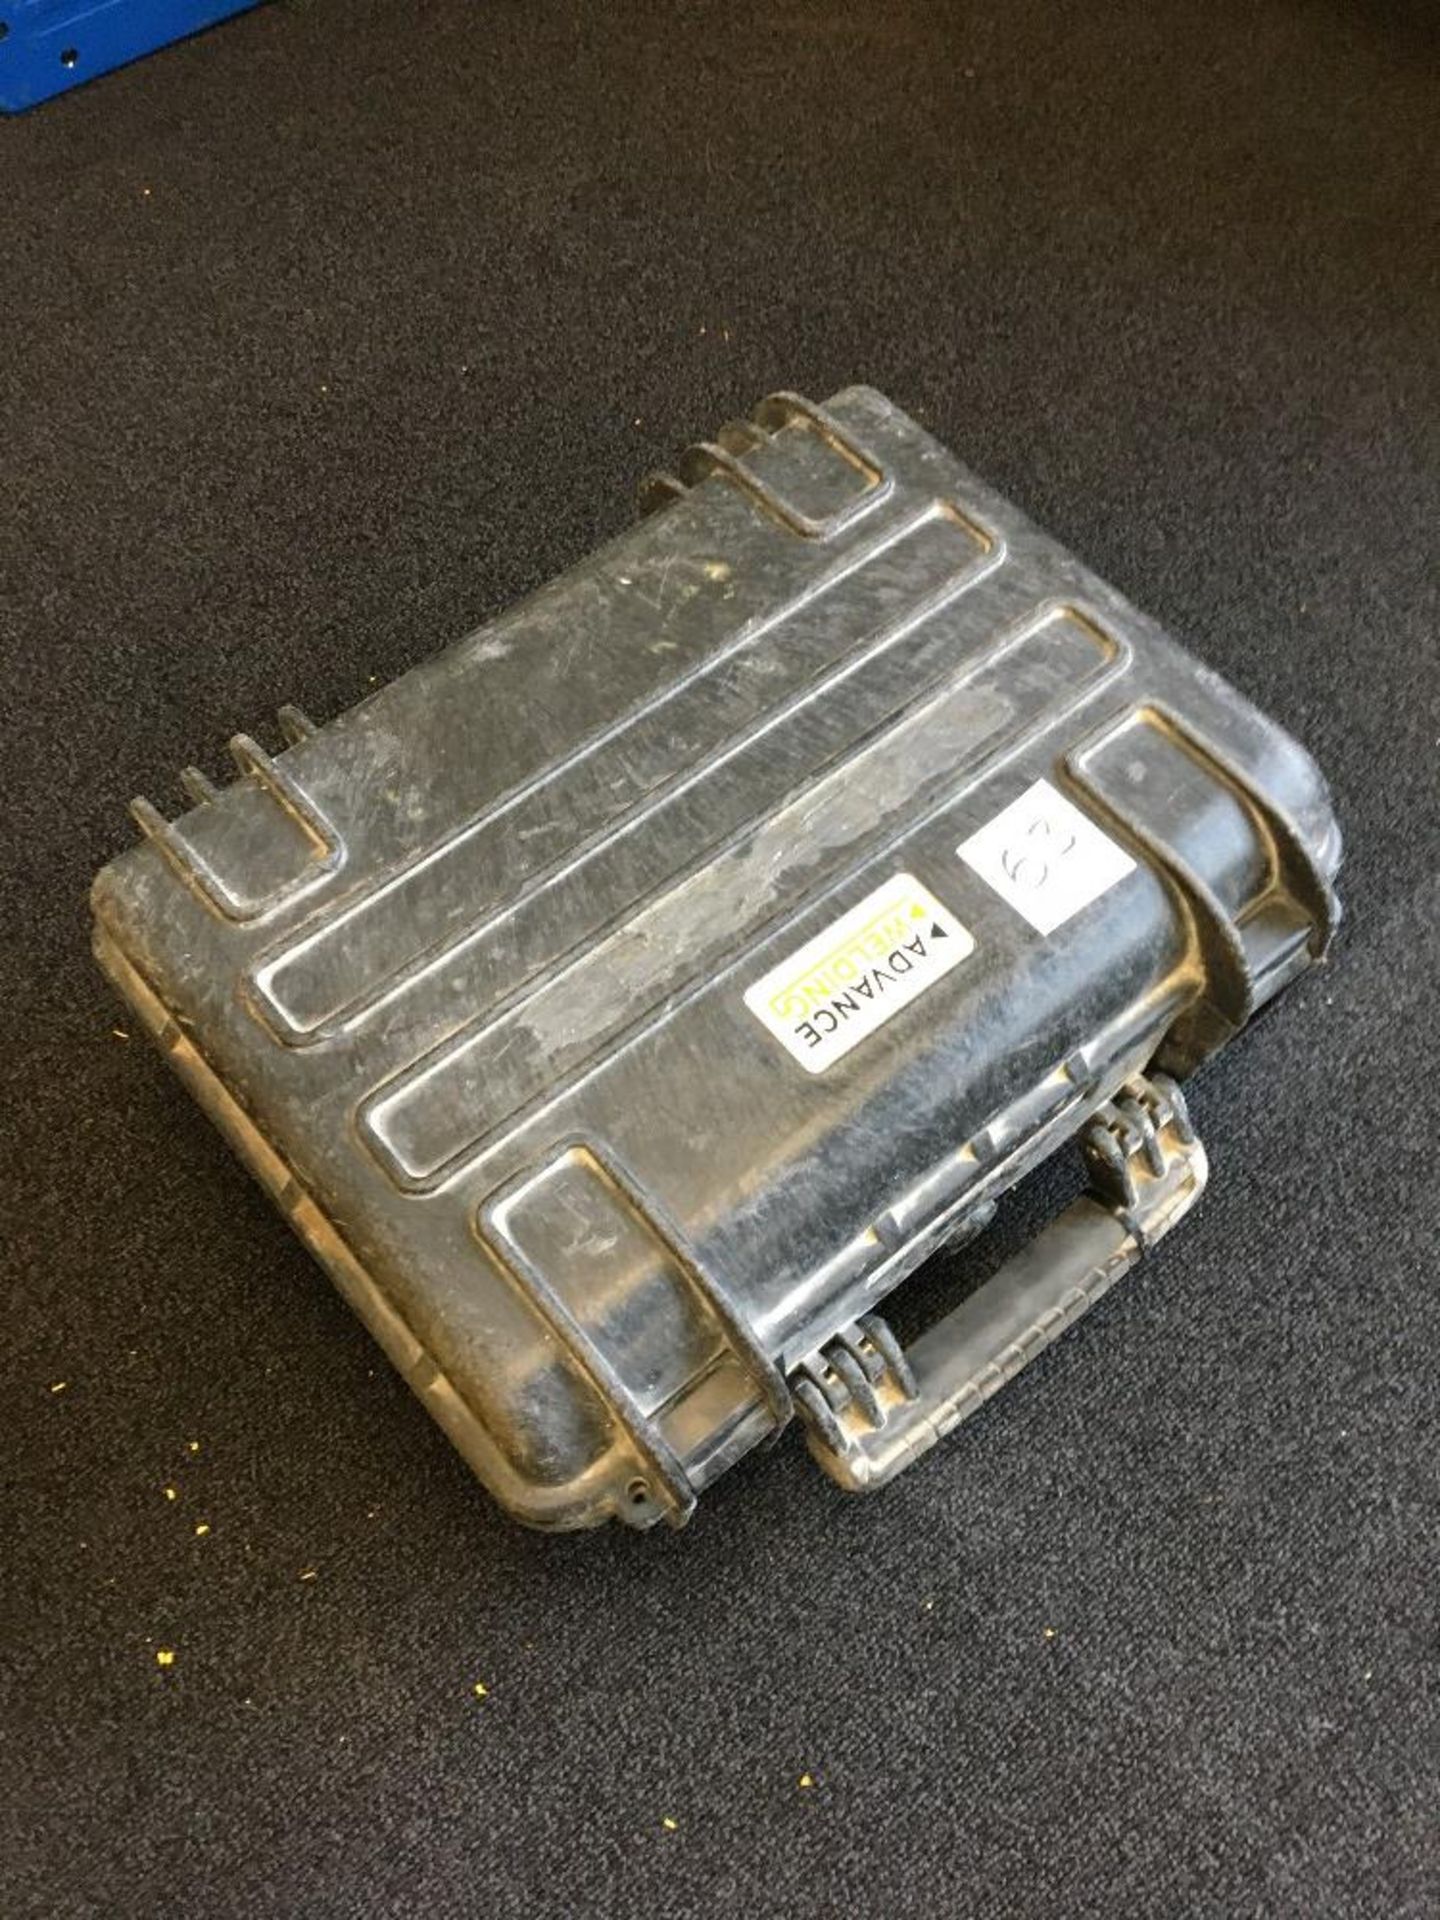 Advance Fusion Welder AW315 electrofusion with carry case - Image 2 of 5